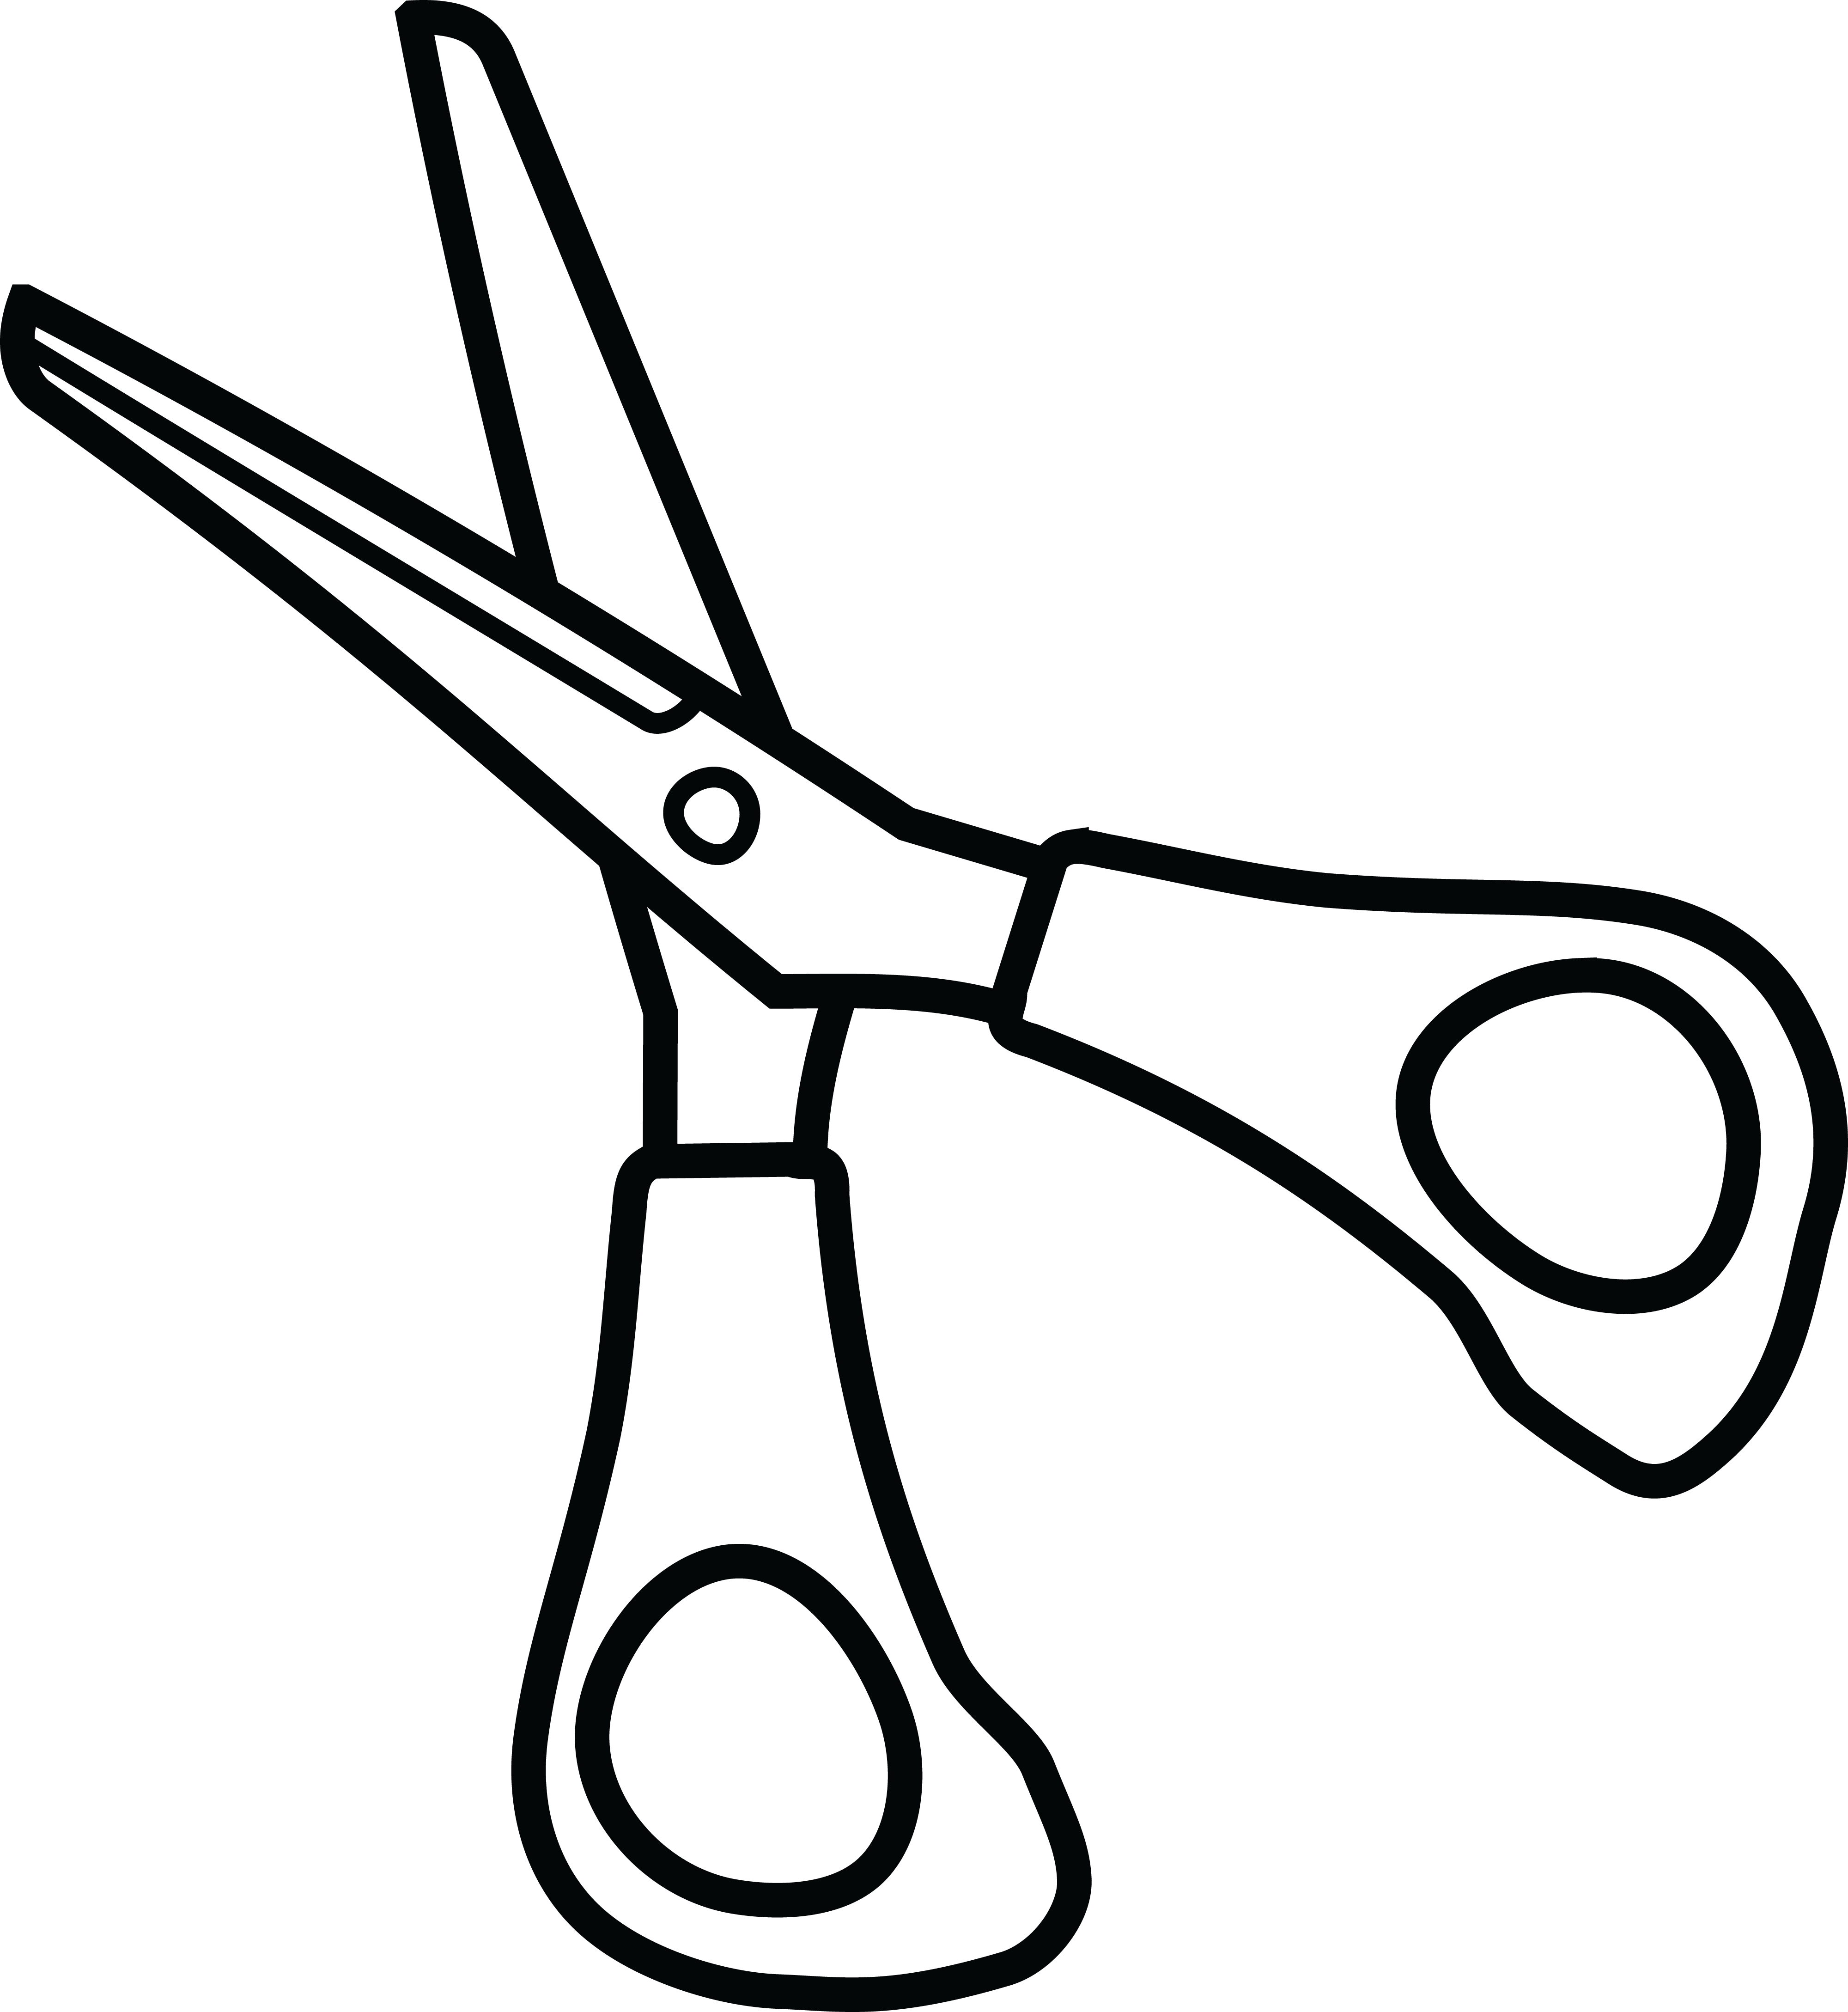 Free Clipart Of A Pair Of Scissors - Black And White Scissors Clip ...